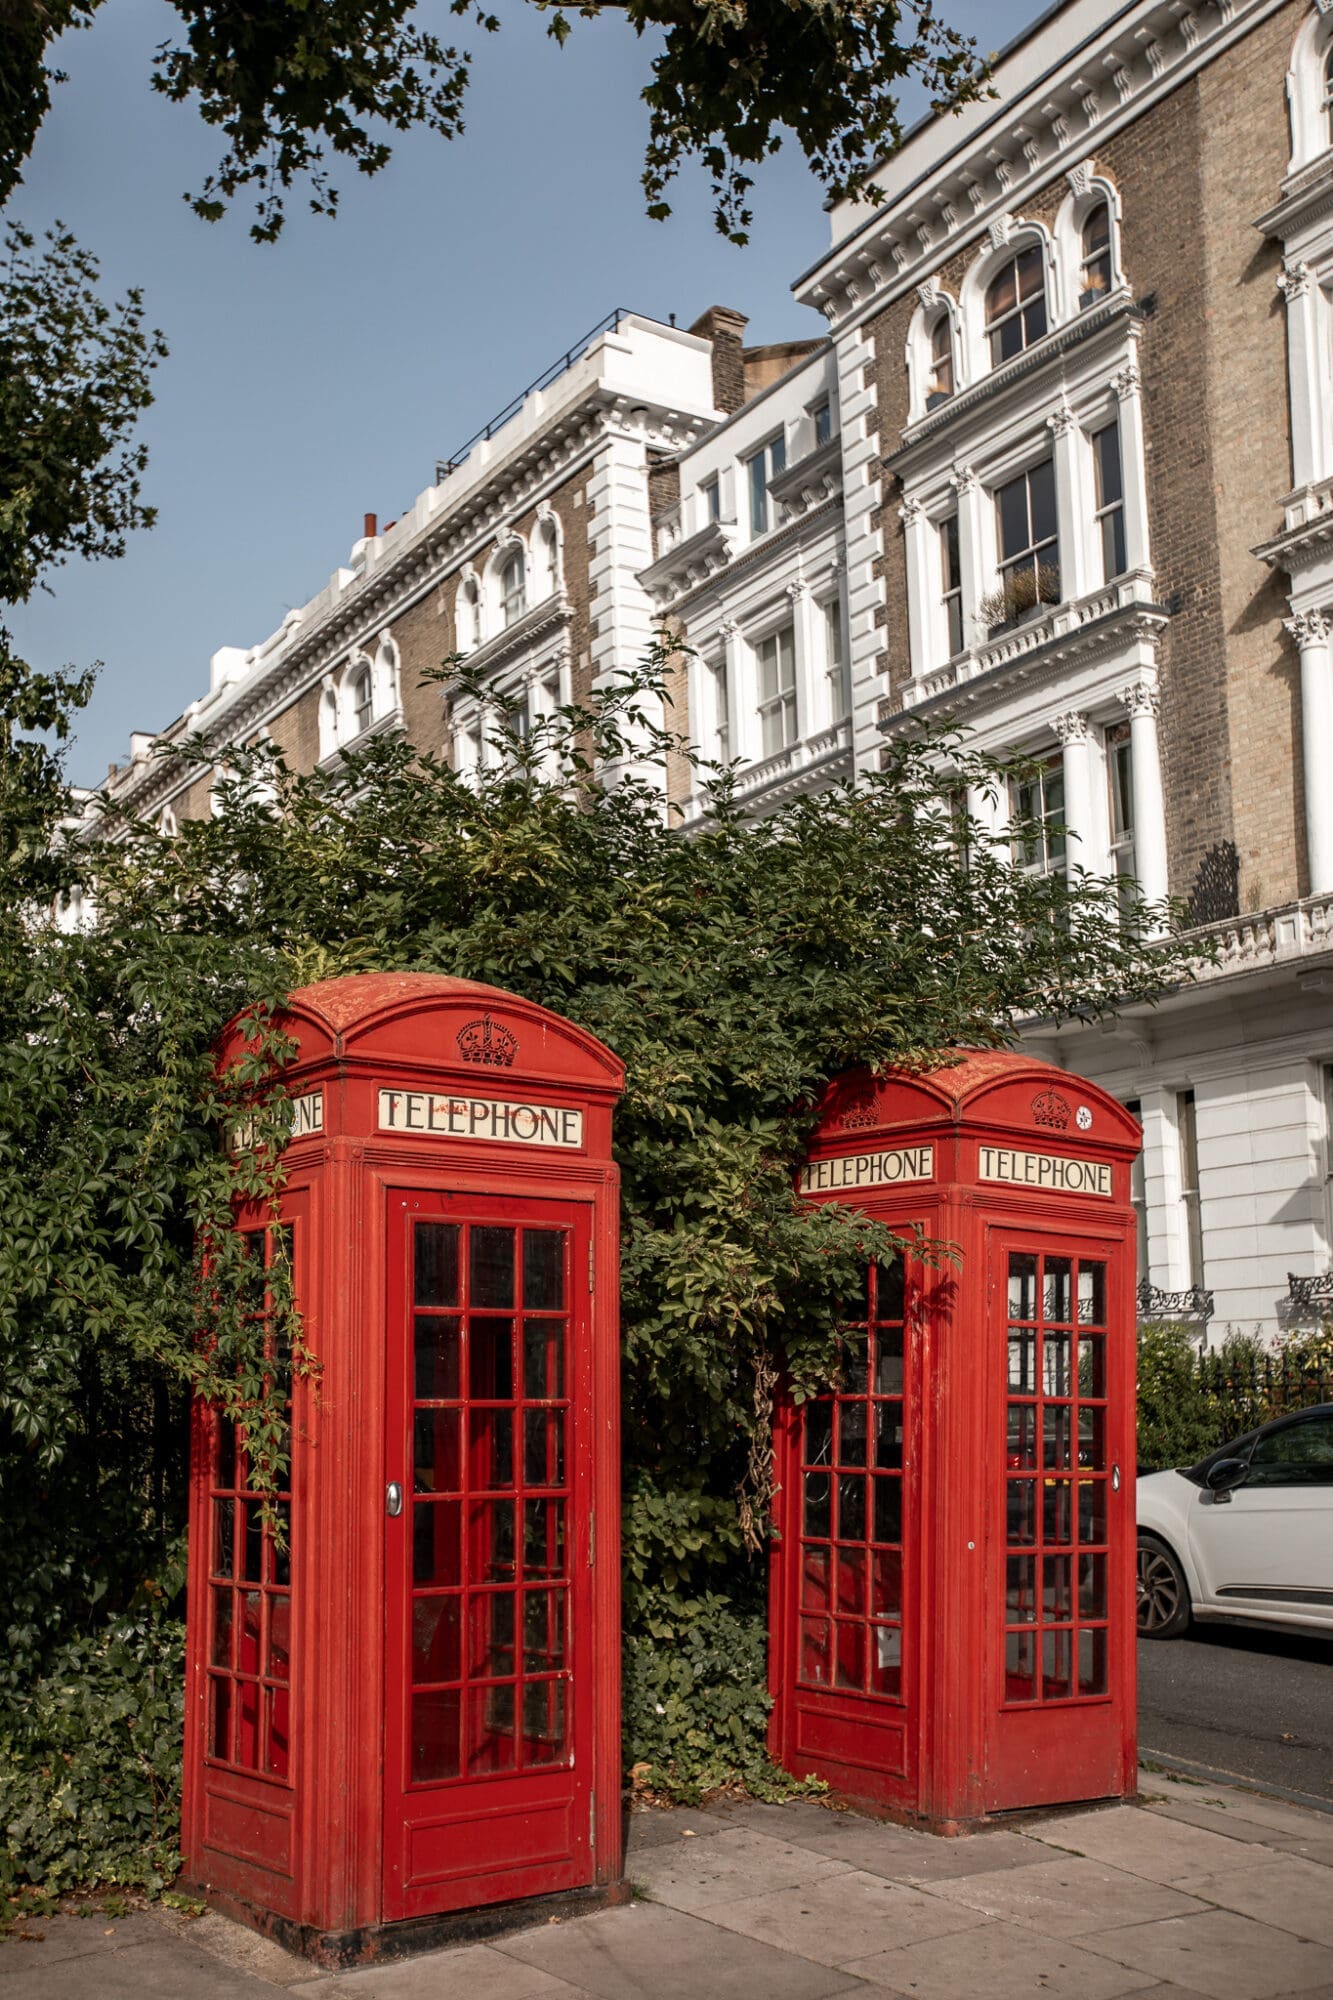 Two red London phone booths on a street in Primrose Hill